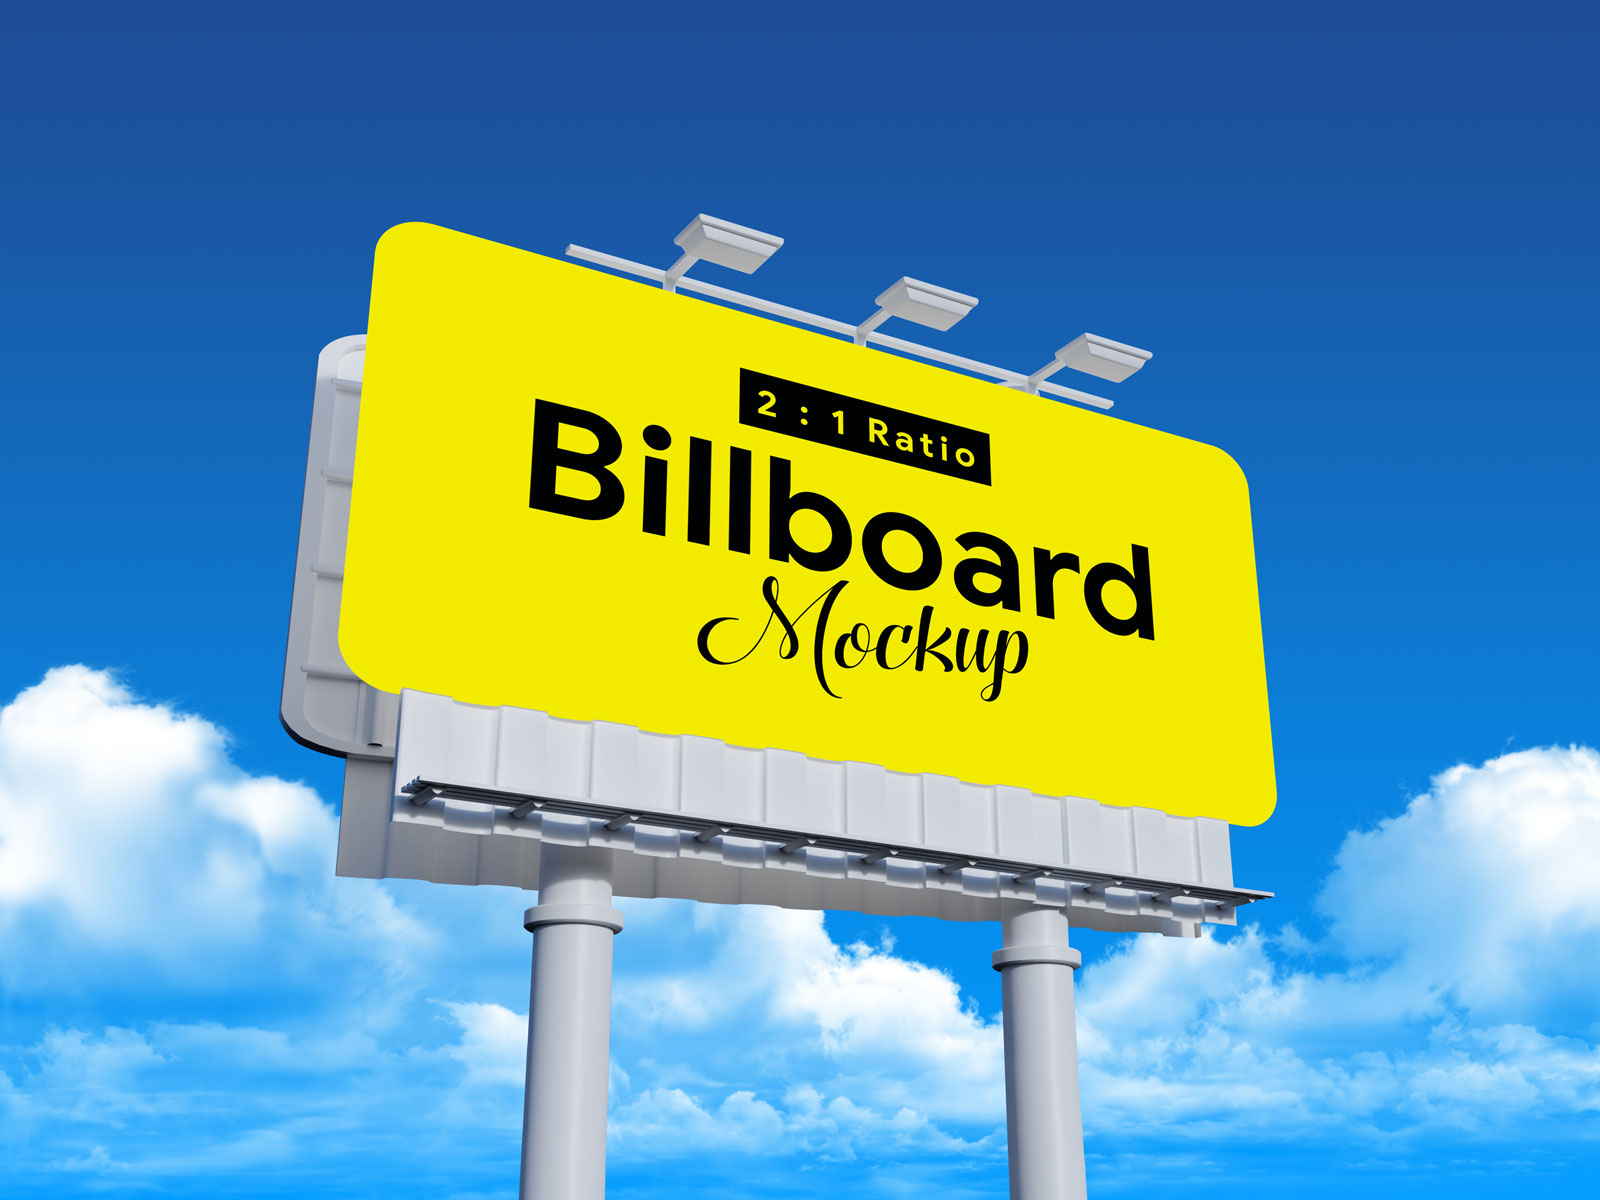 Free 2:1 Outdoor Advertising Rounded Corners Billboard Mockup PSD | Designbolts